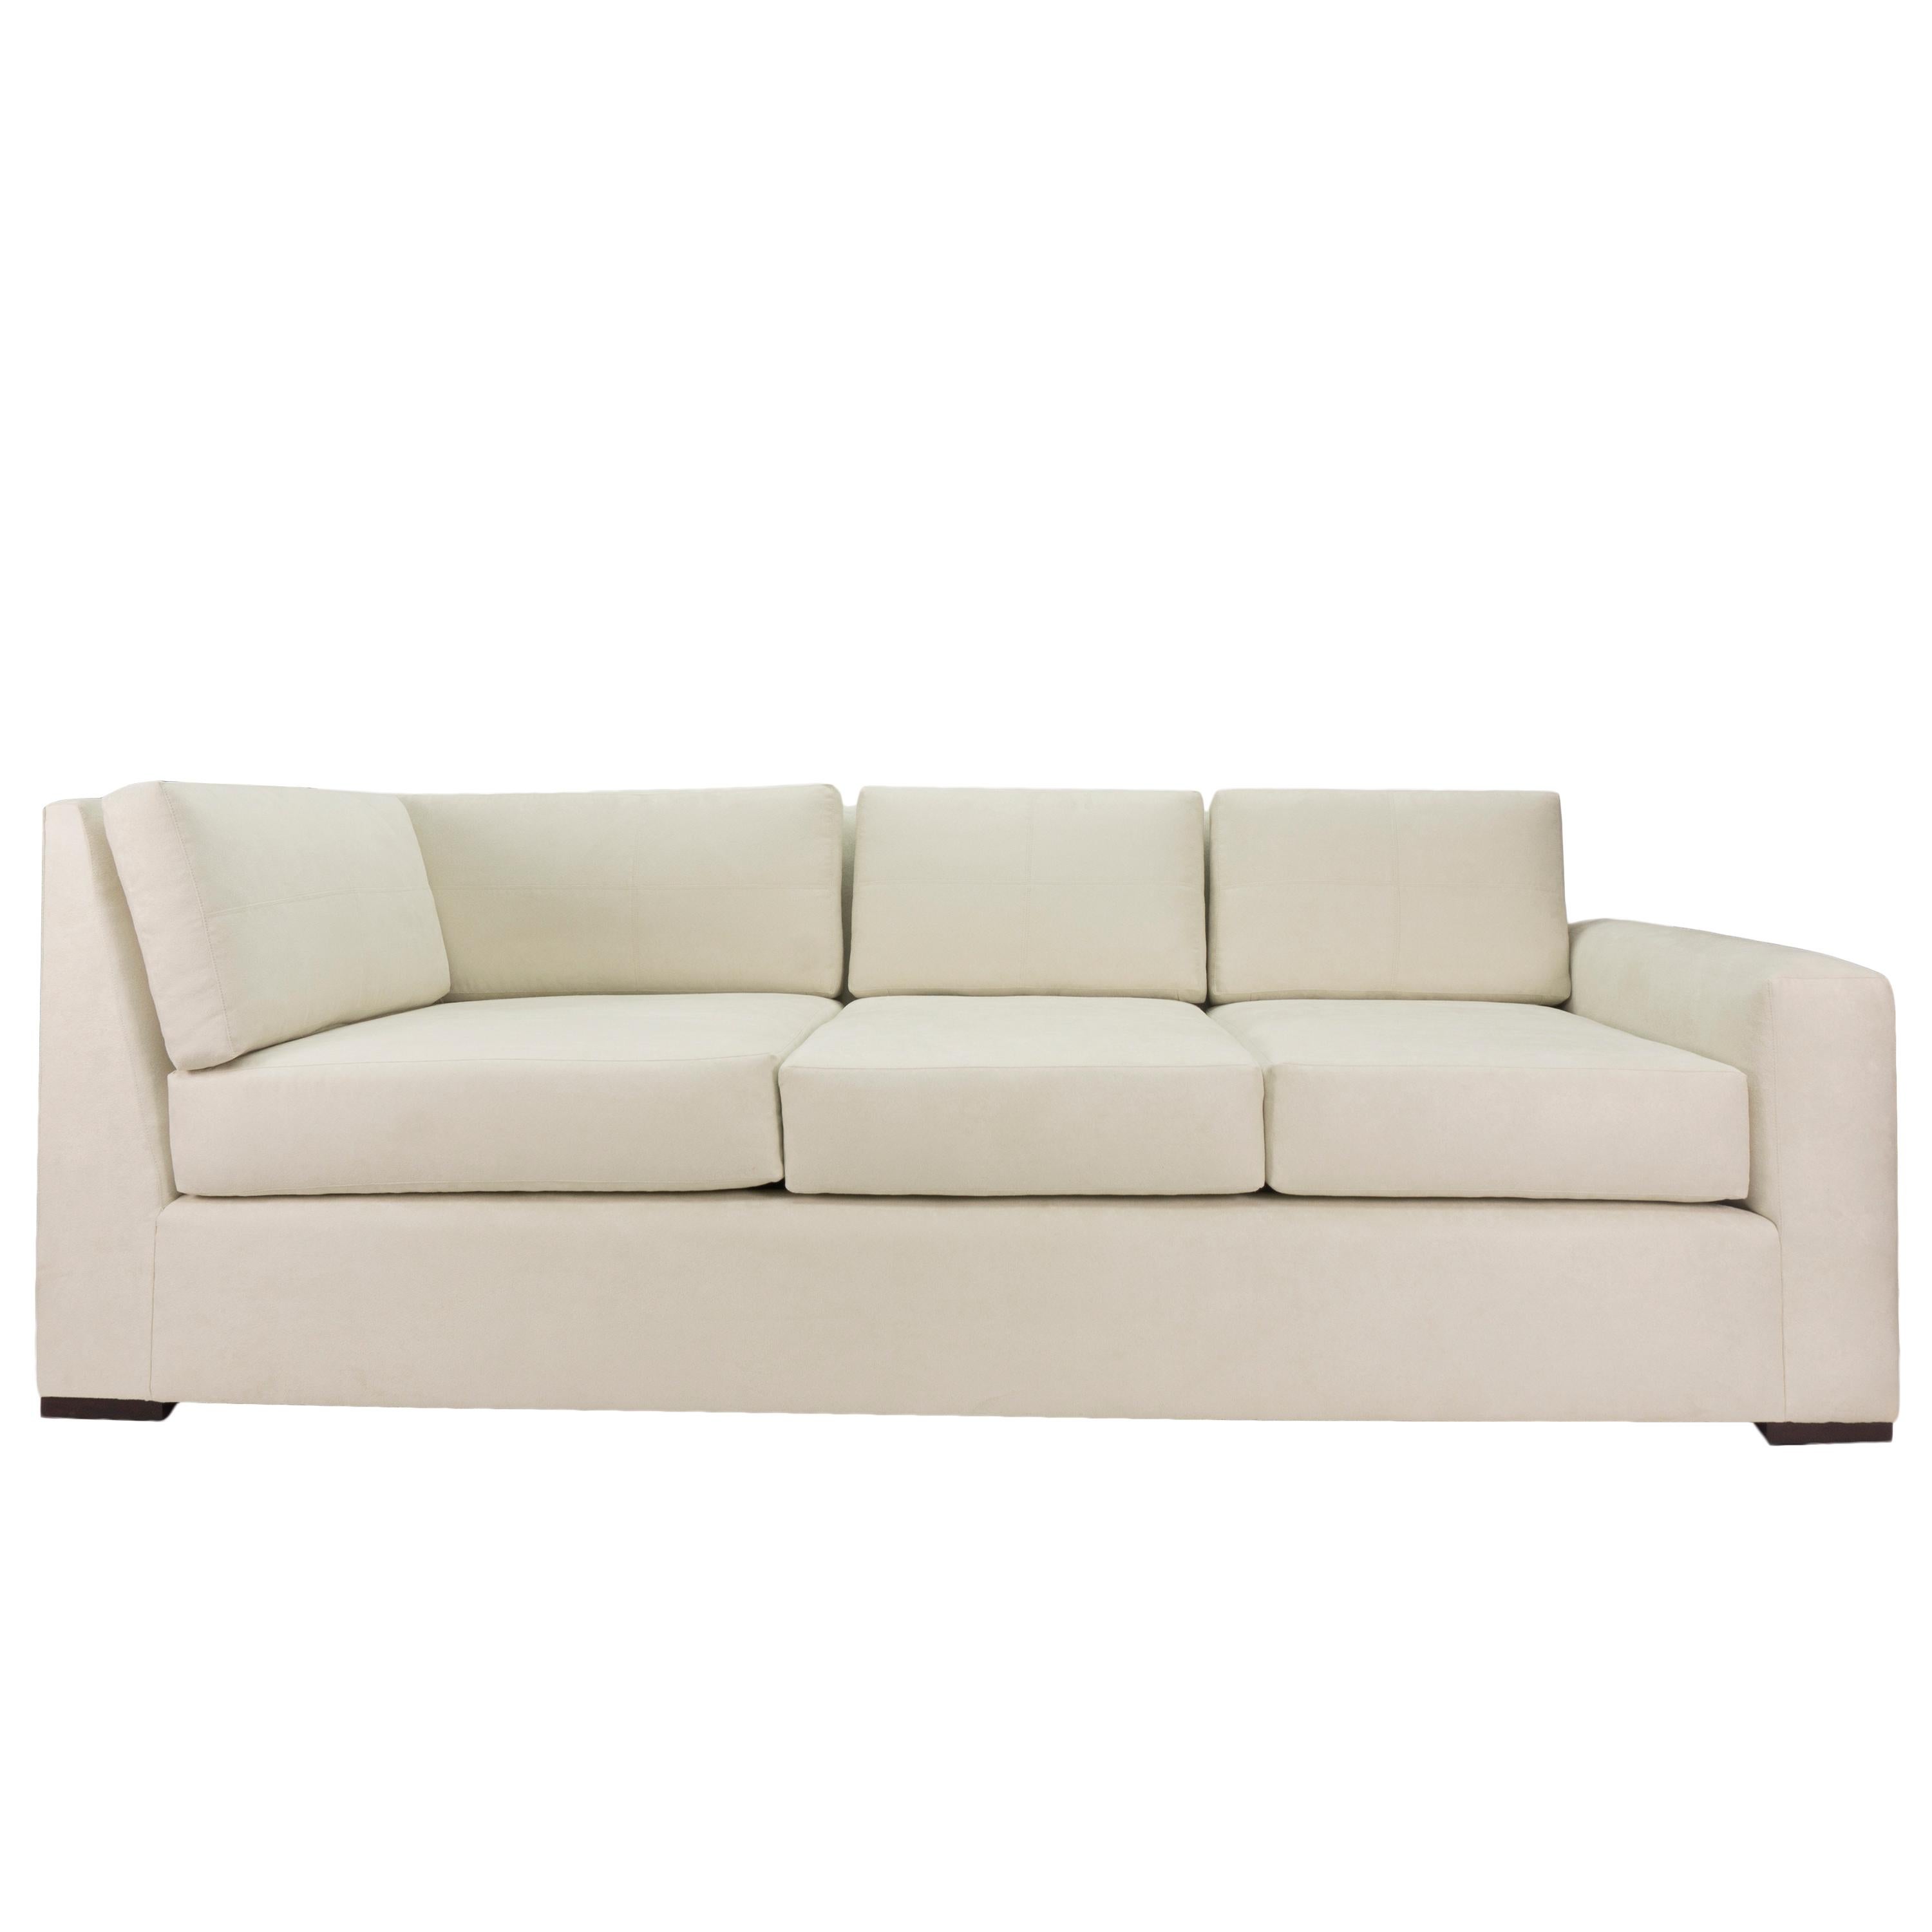 Square Arm Loose Cushion Sectional Sofa, Customizable For Sale 3